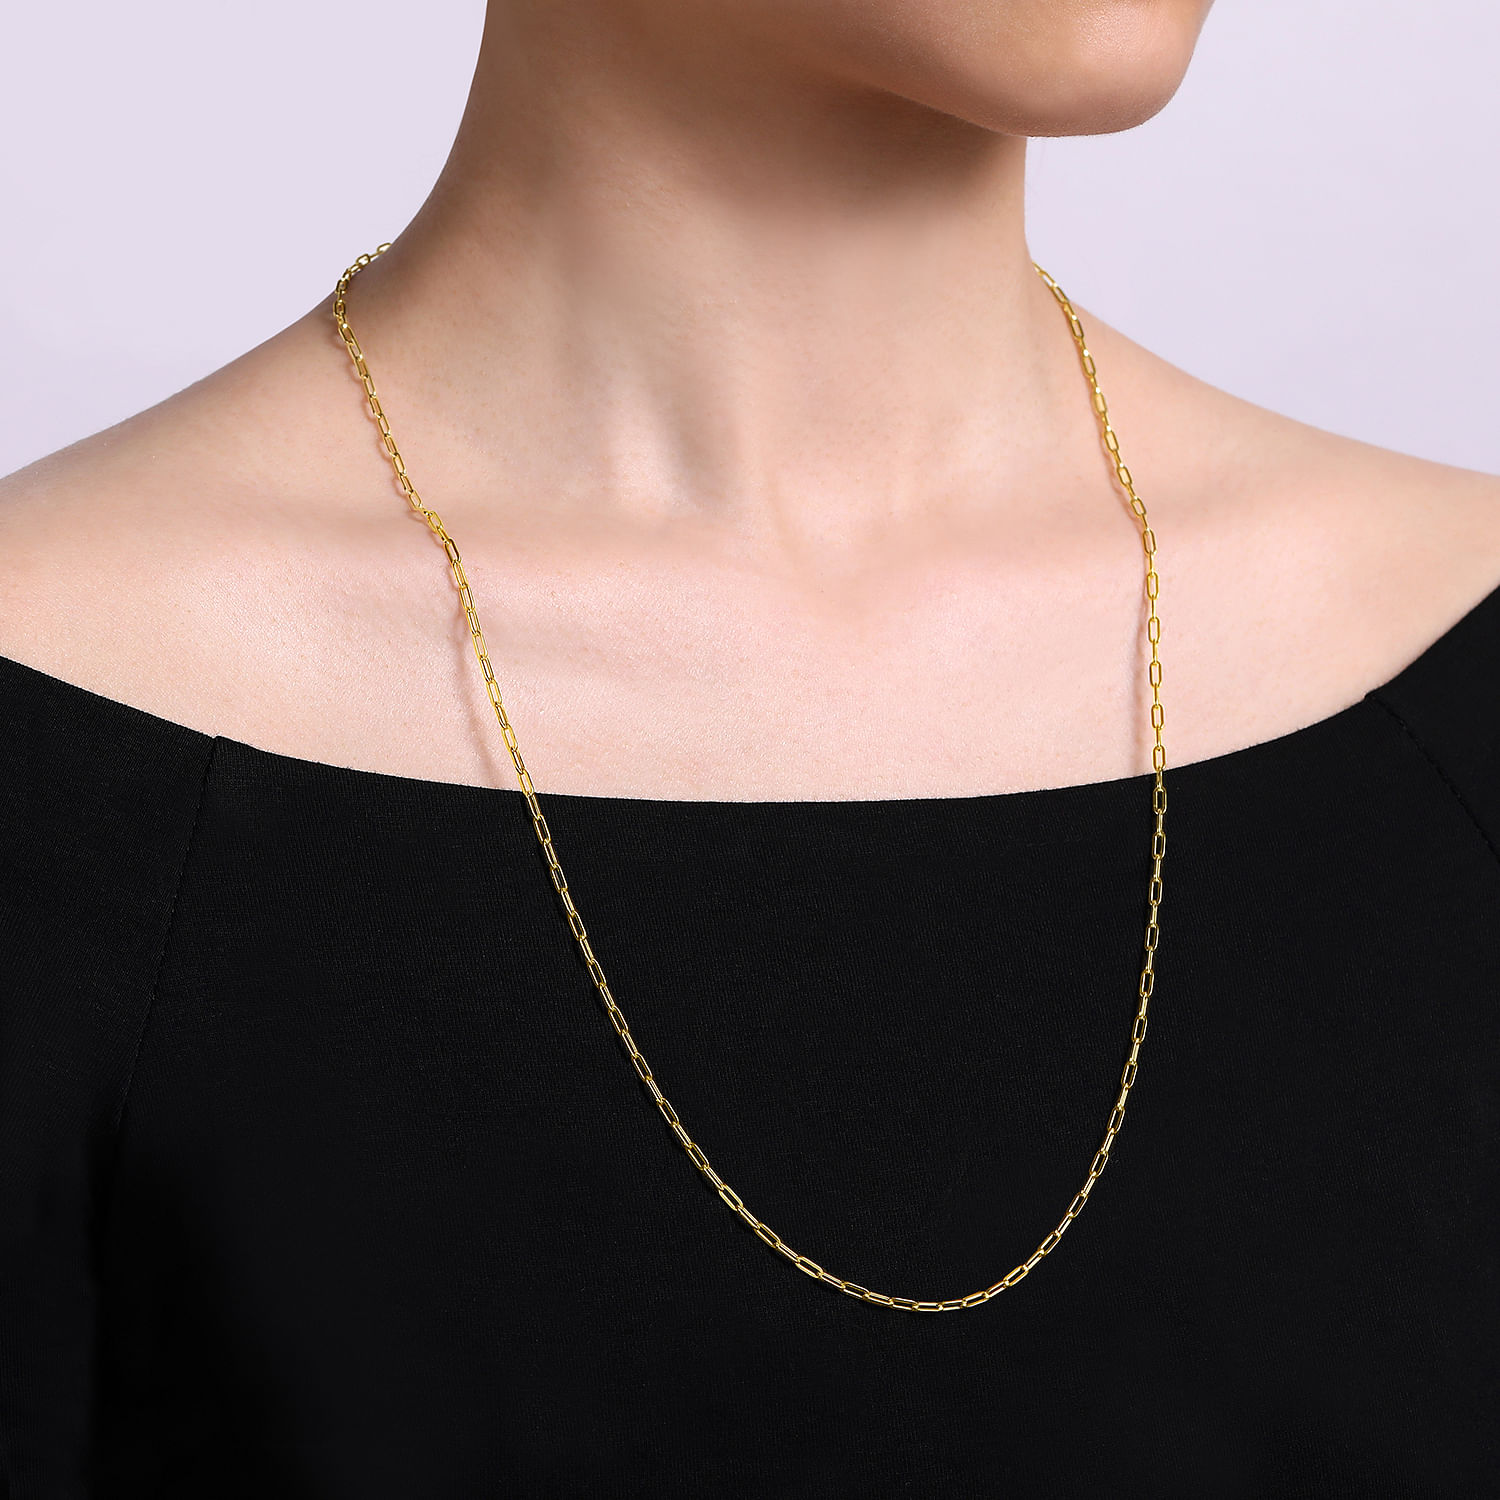 26 inch 14K Yellow Gold Hollow Paper Clip Necklace